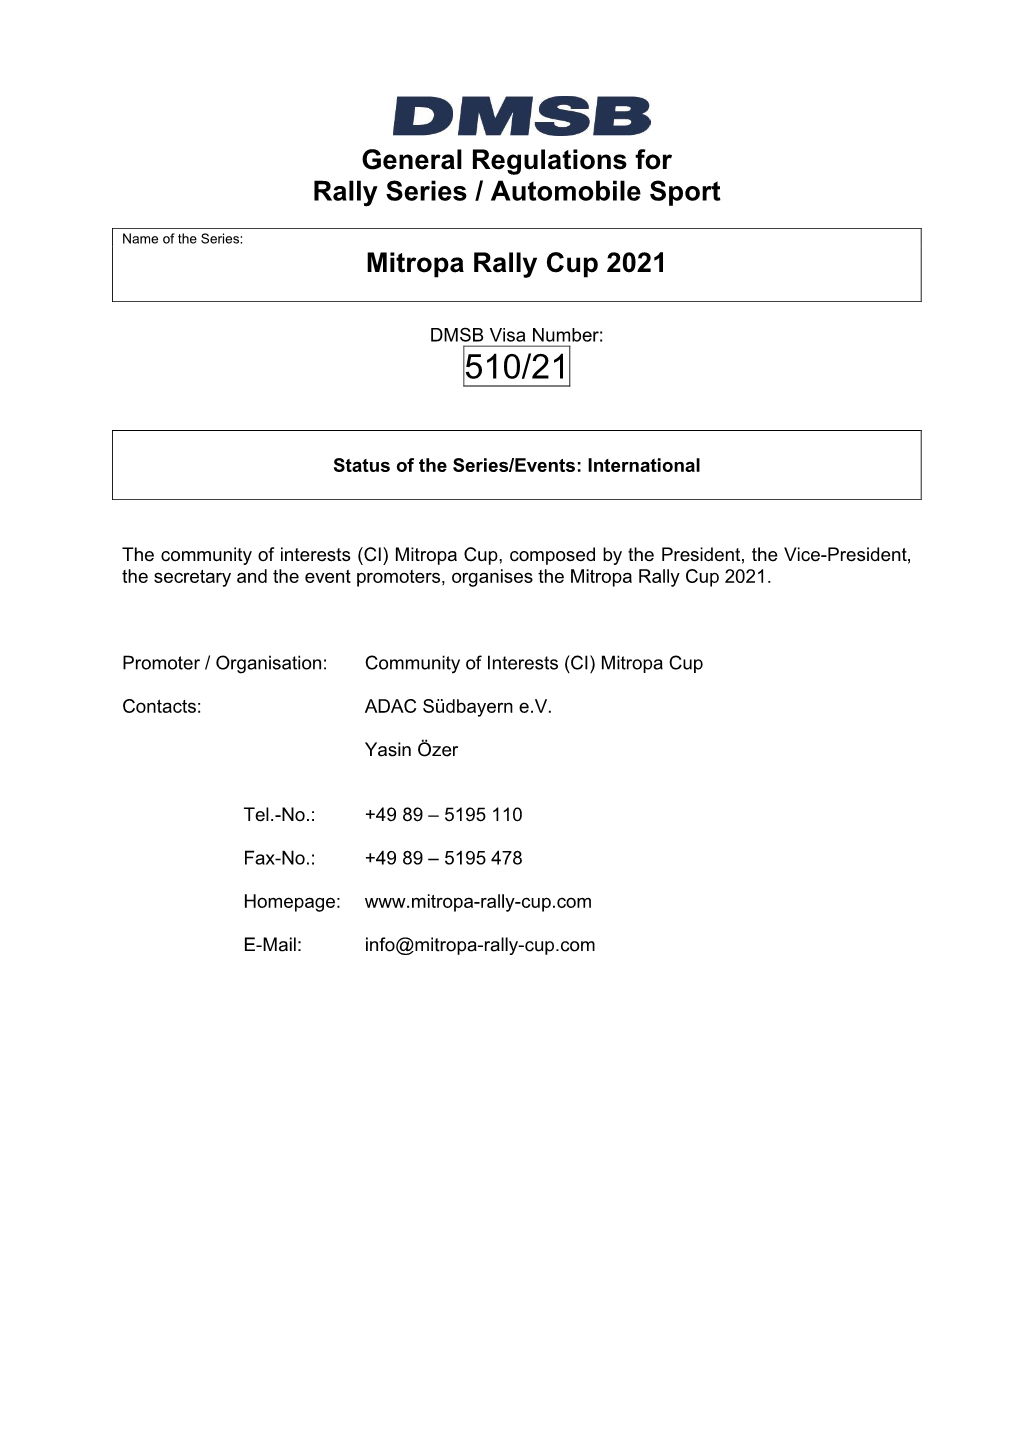 General Regulations for Rally Series / Automobile Sport Mitropa Rally Cup